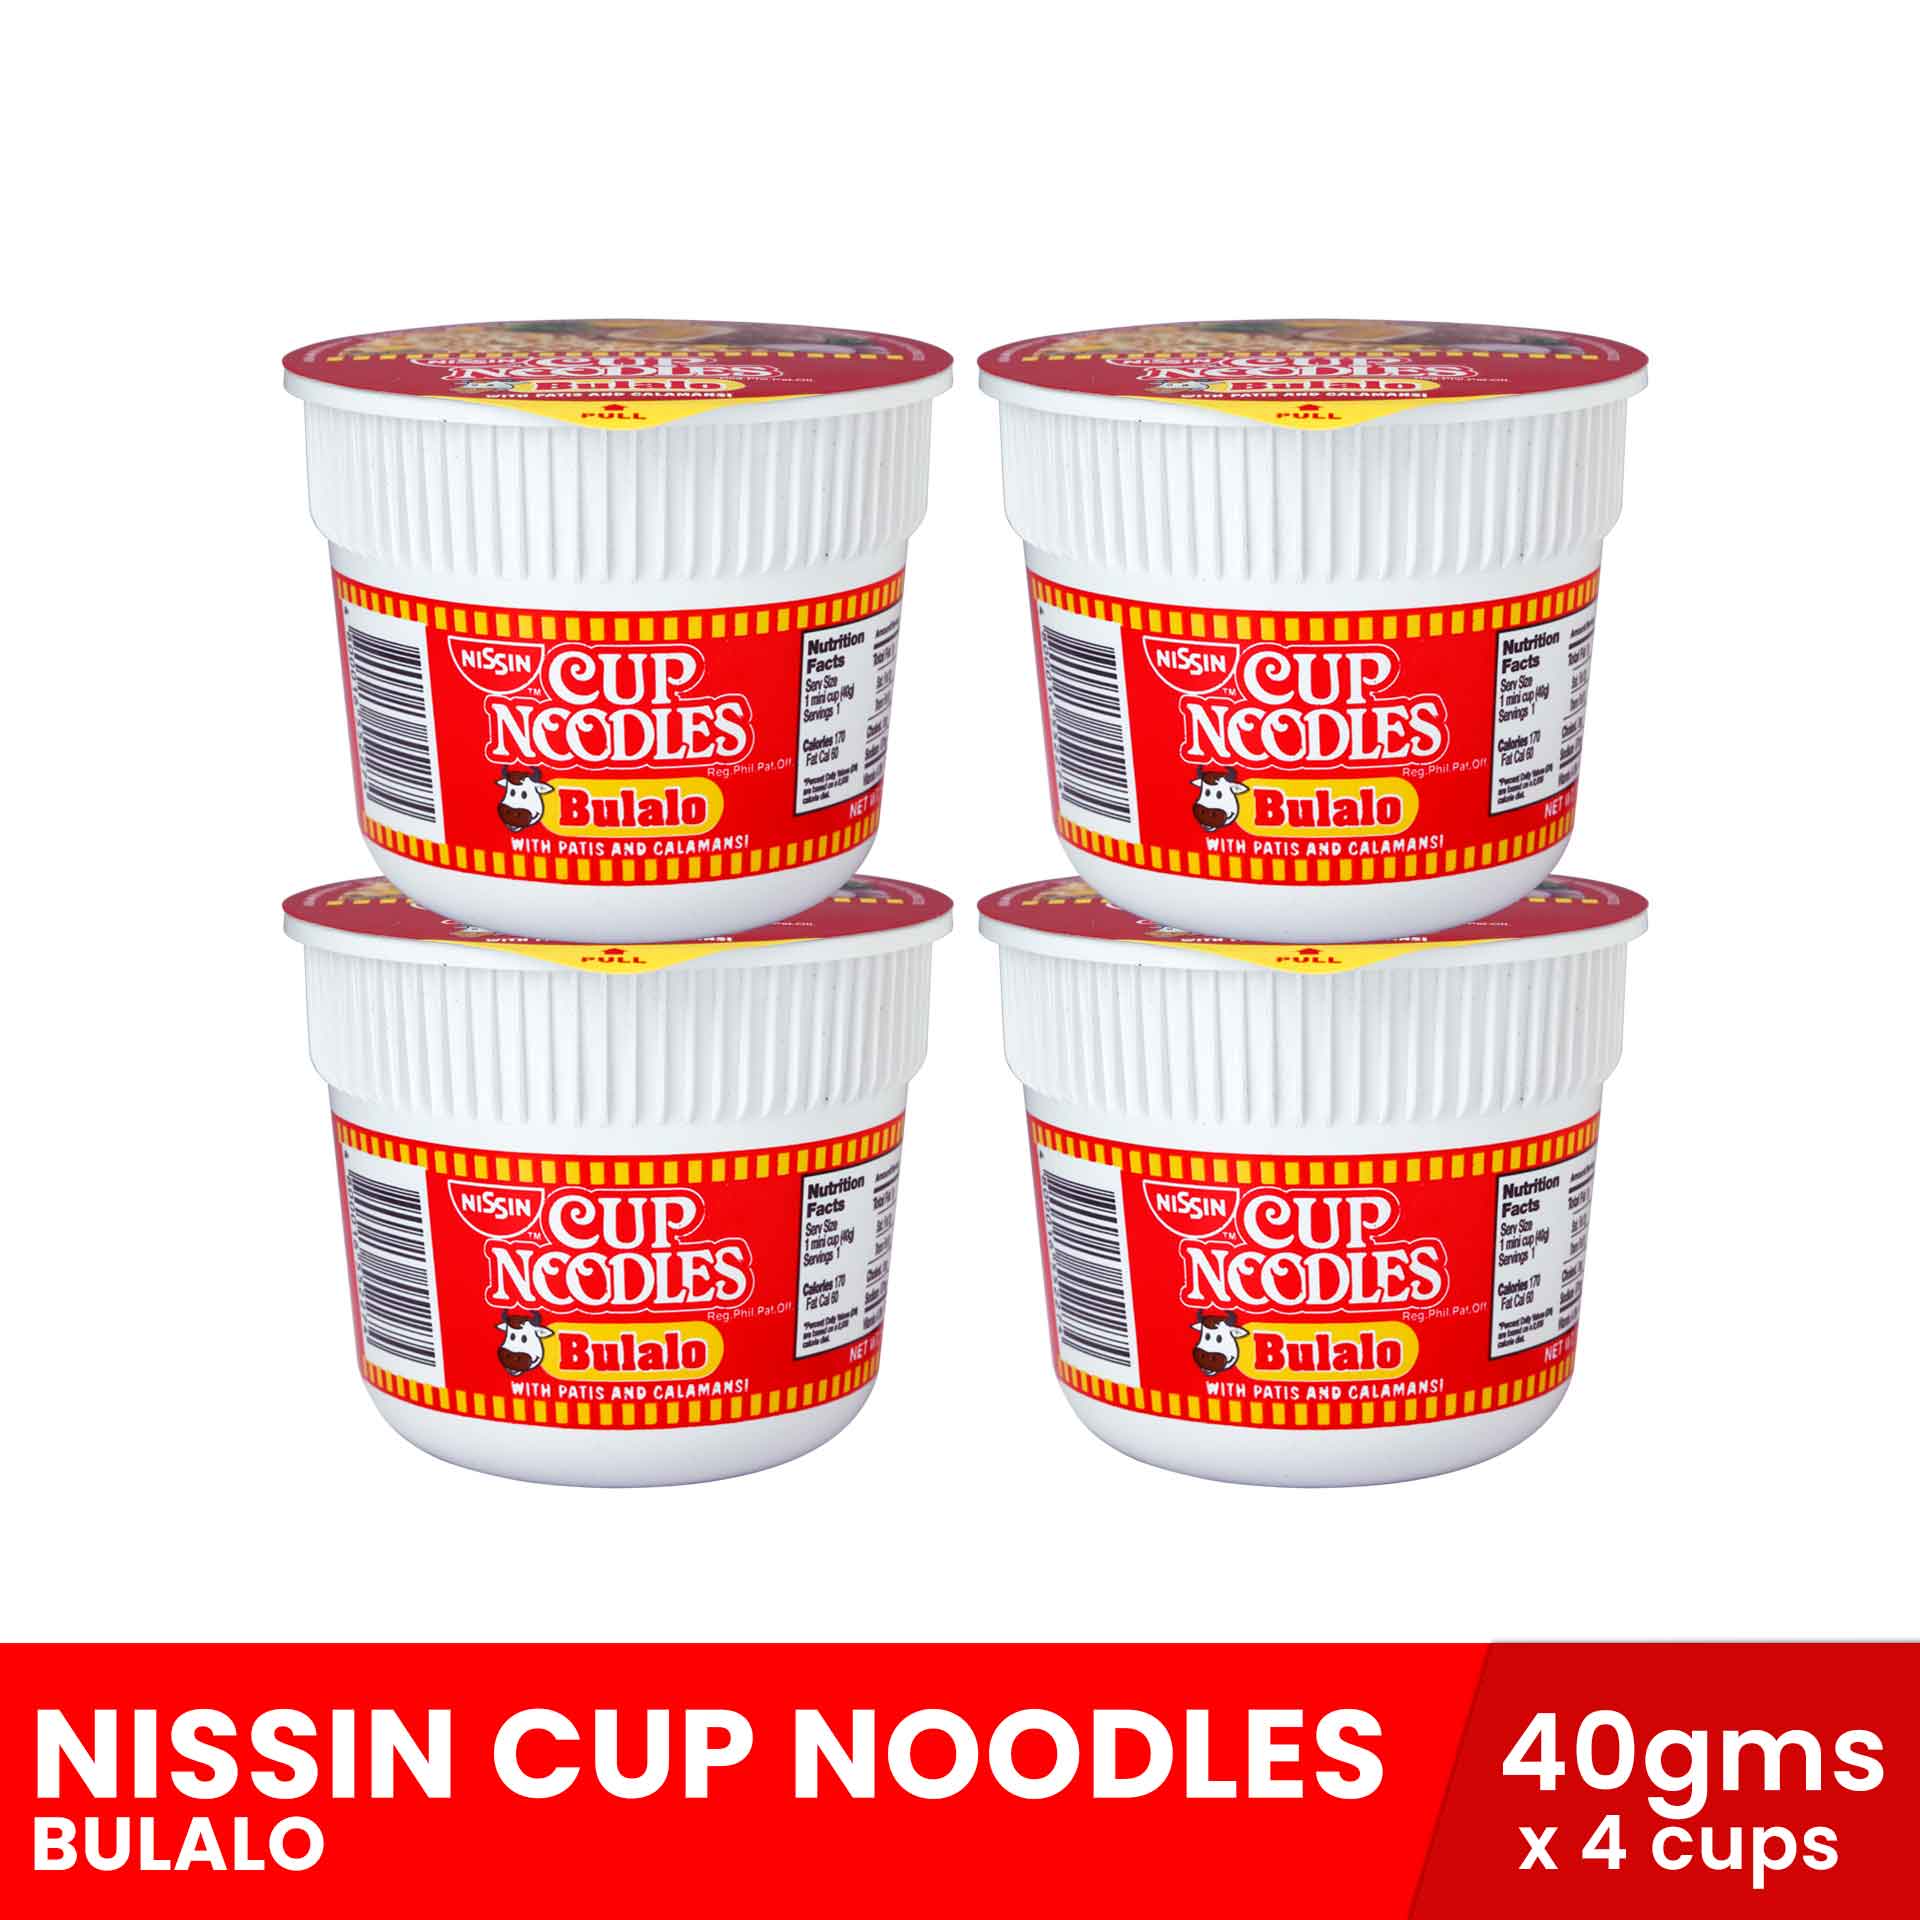 NISSIN Cup Noodles Bulalo 40gx 4 cups